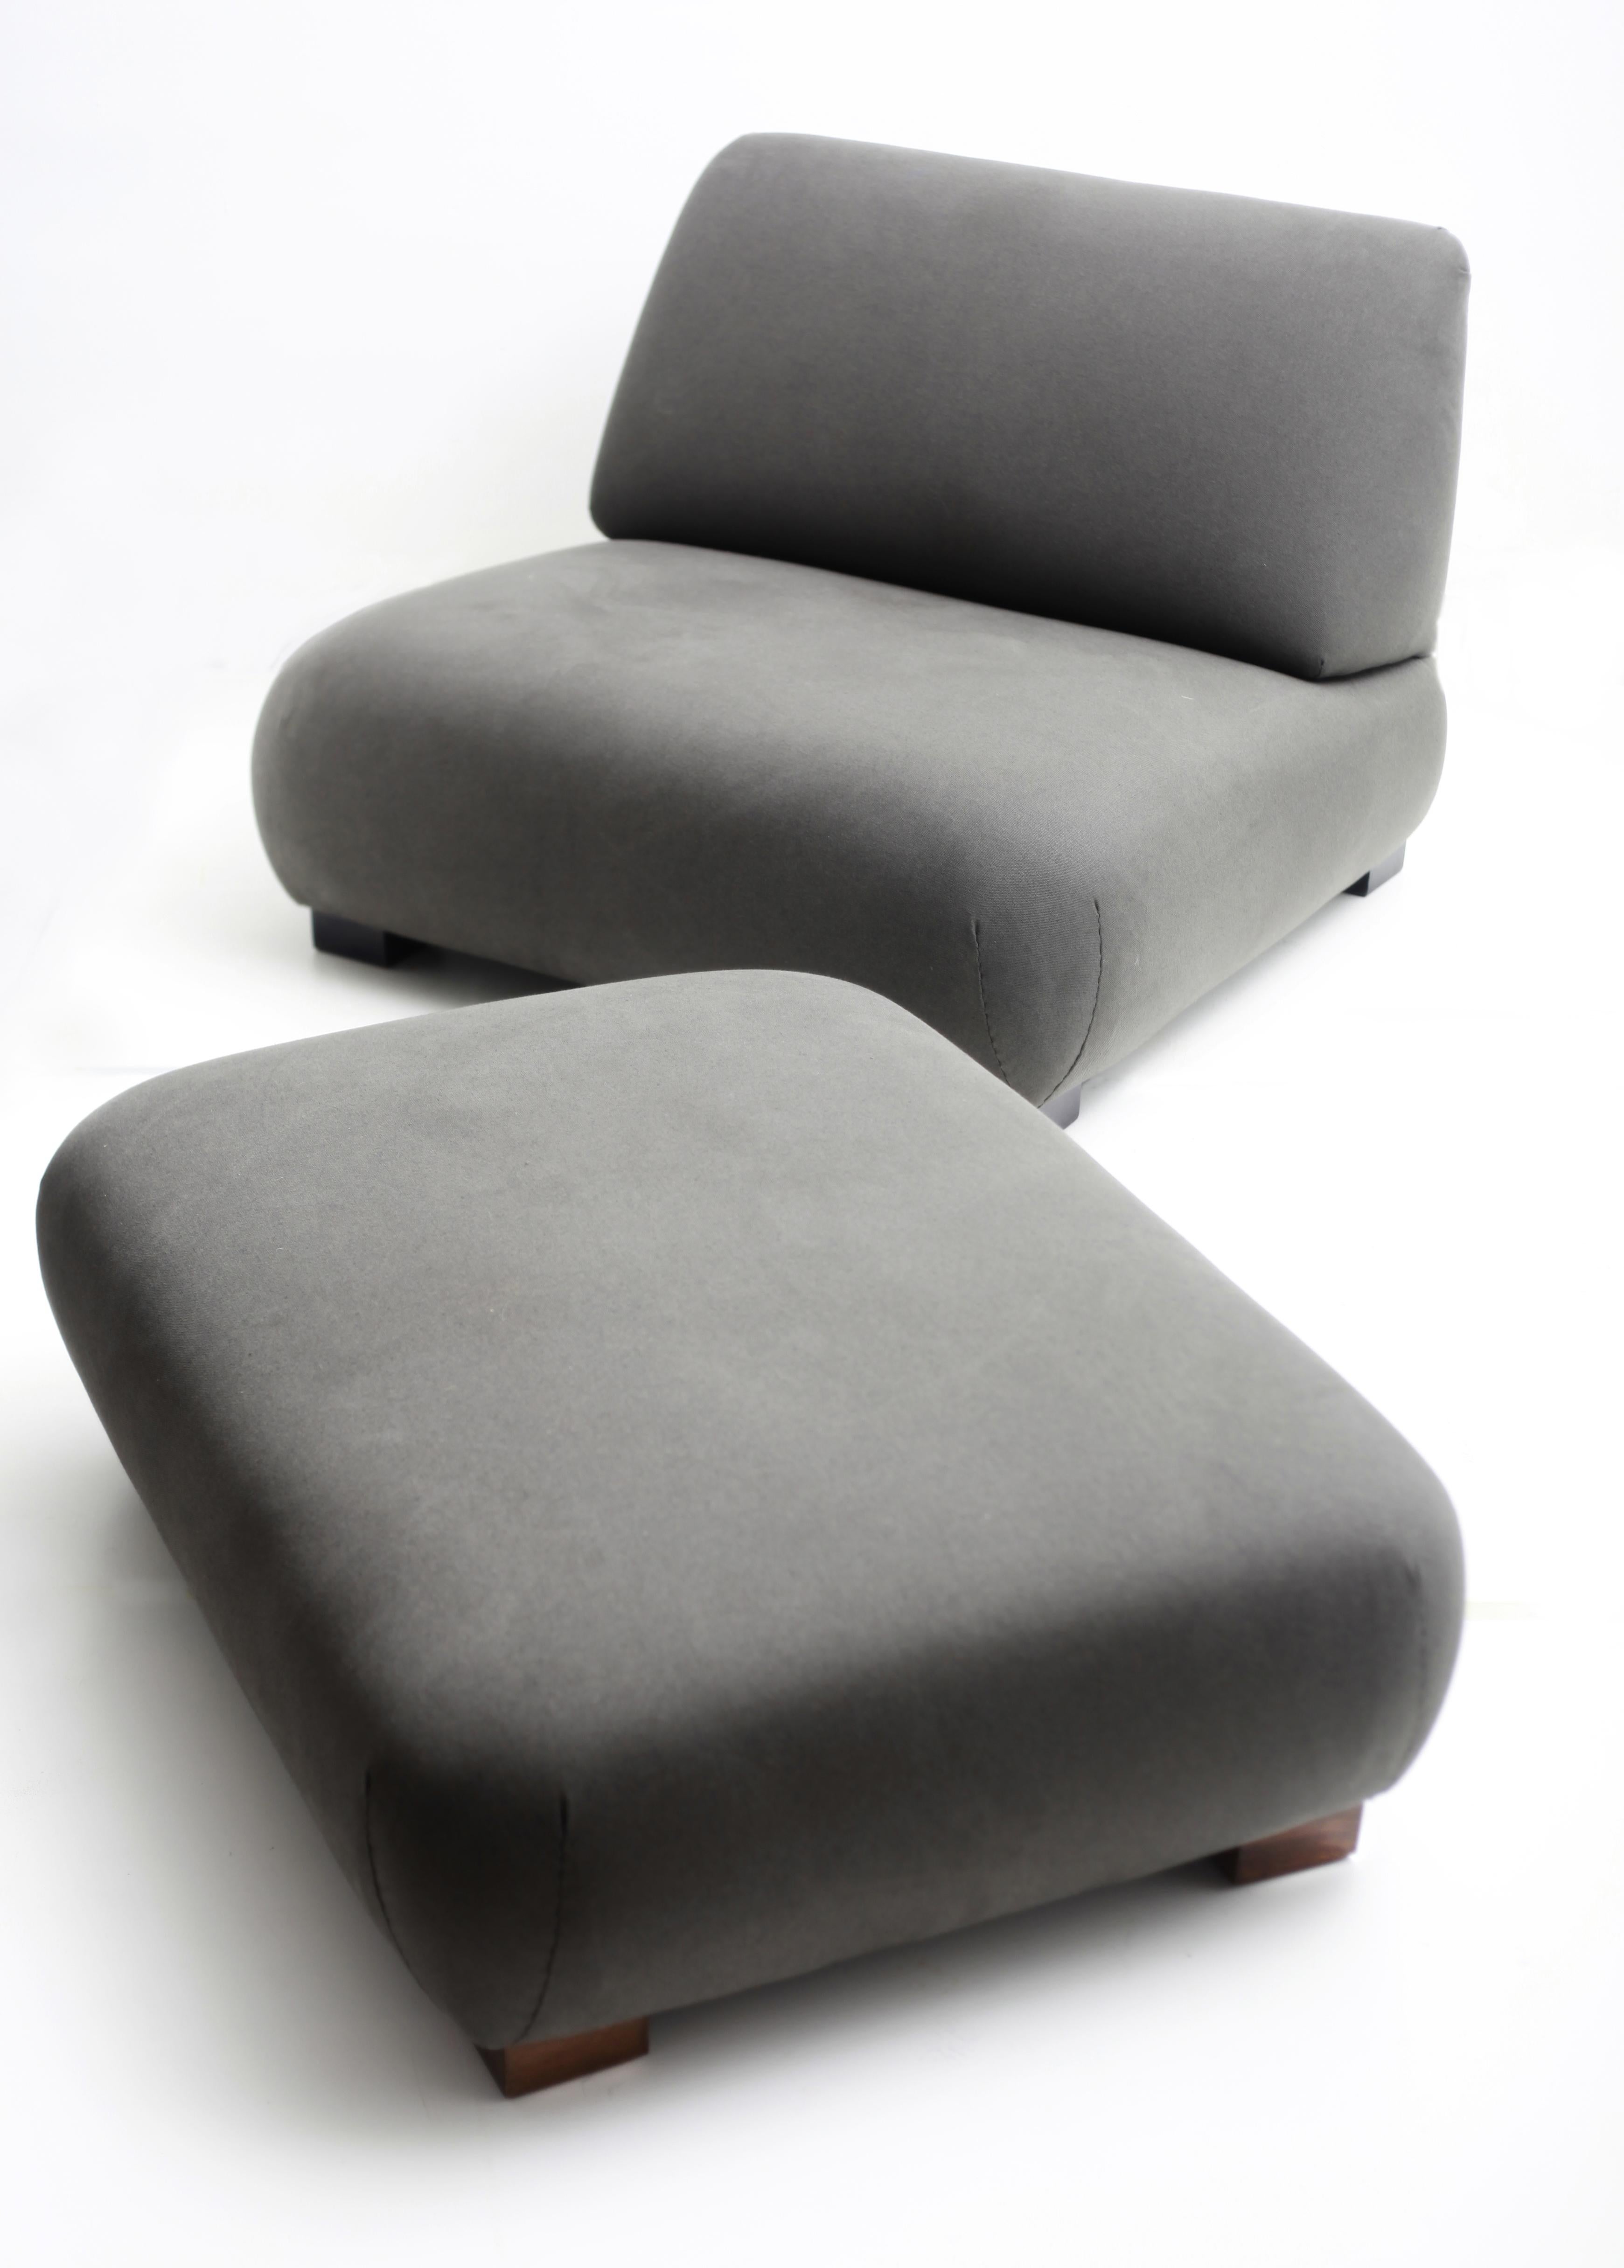 Cadaqués ottoman by Federico Correa, Alfonso Milá
Dimensions: D 75 x W 100 x H 34 cm
Materials: beech wood, fabric.
Available in other fabrics.

The Cadaqués ensemble sums up an entire philosophy of good living in the form of a sofa, lounge chair